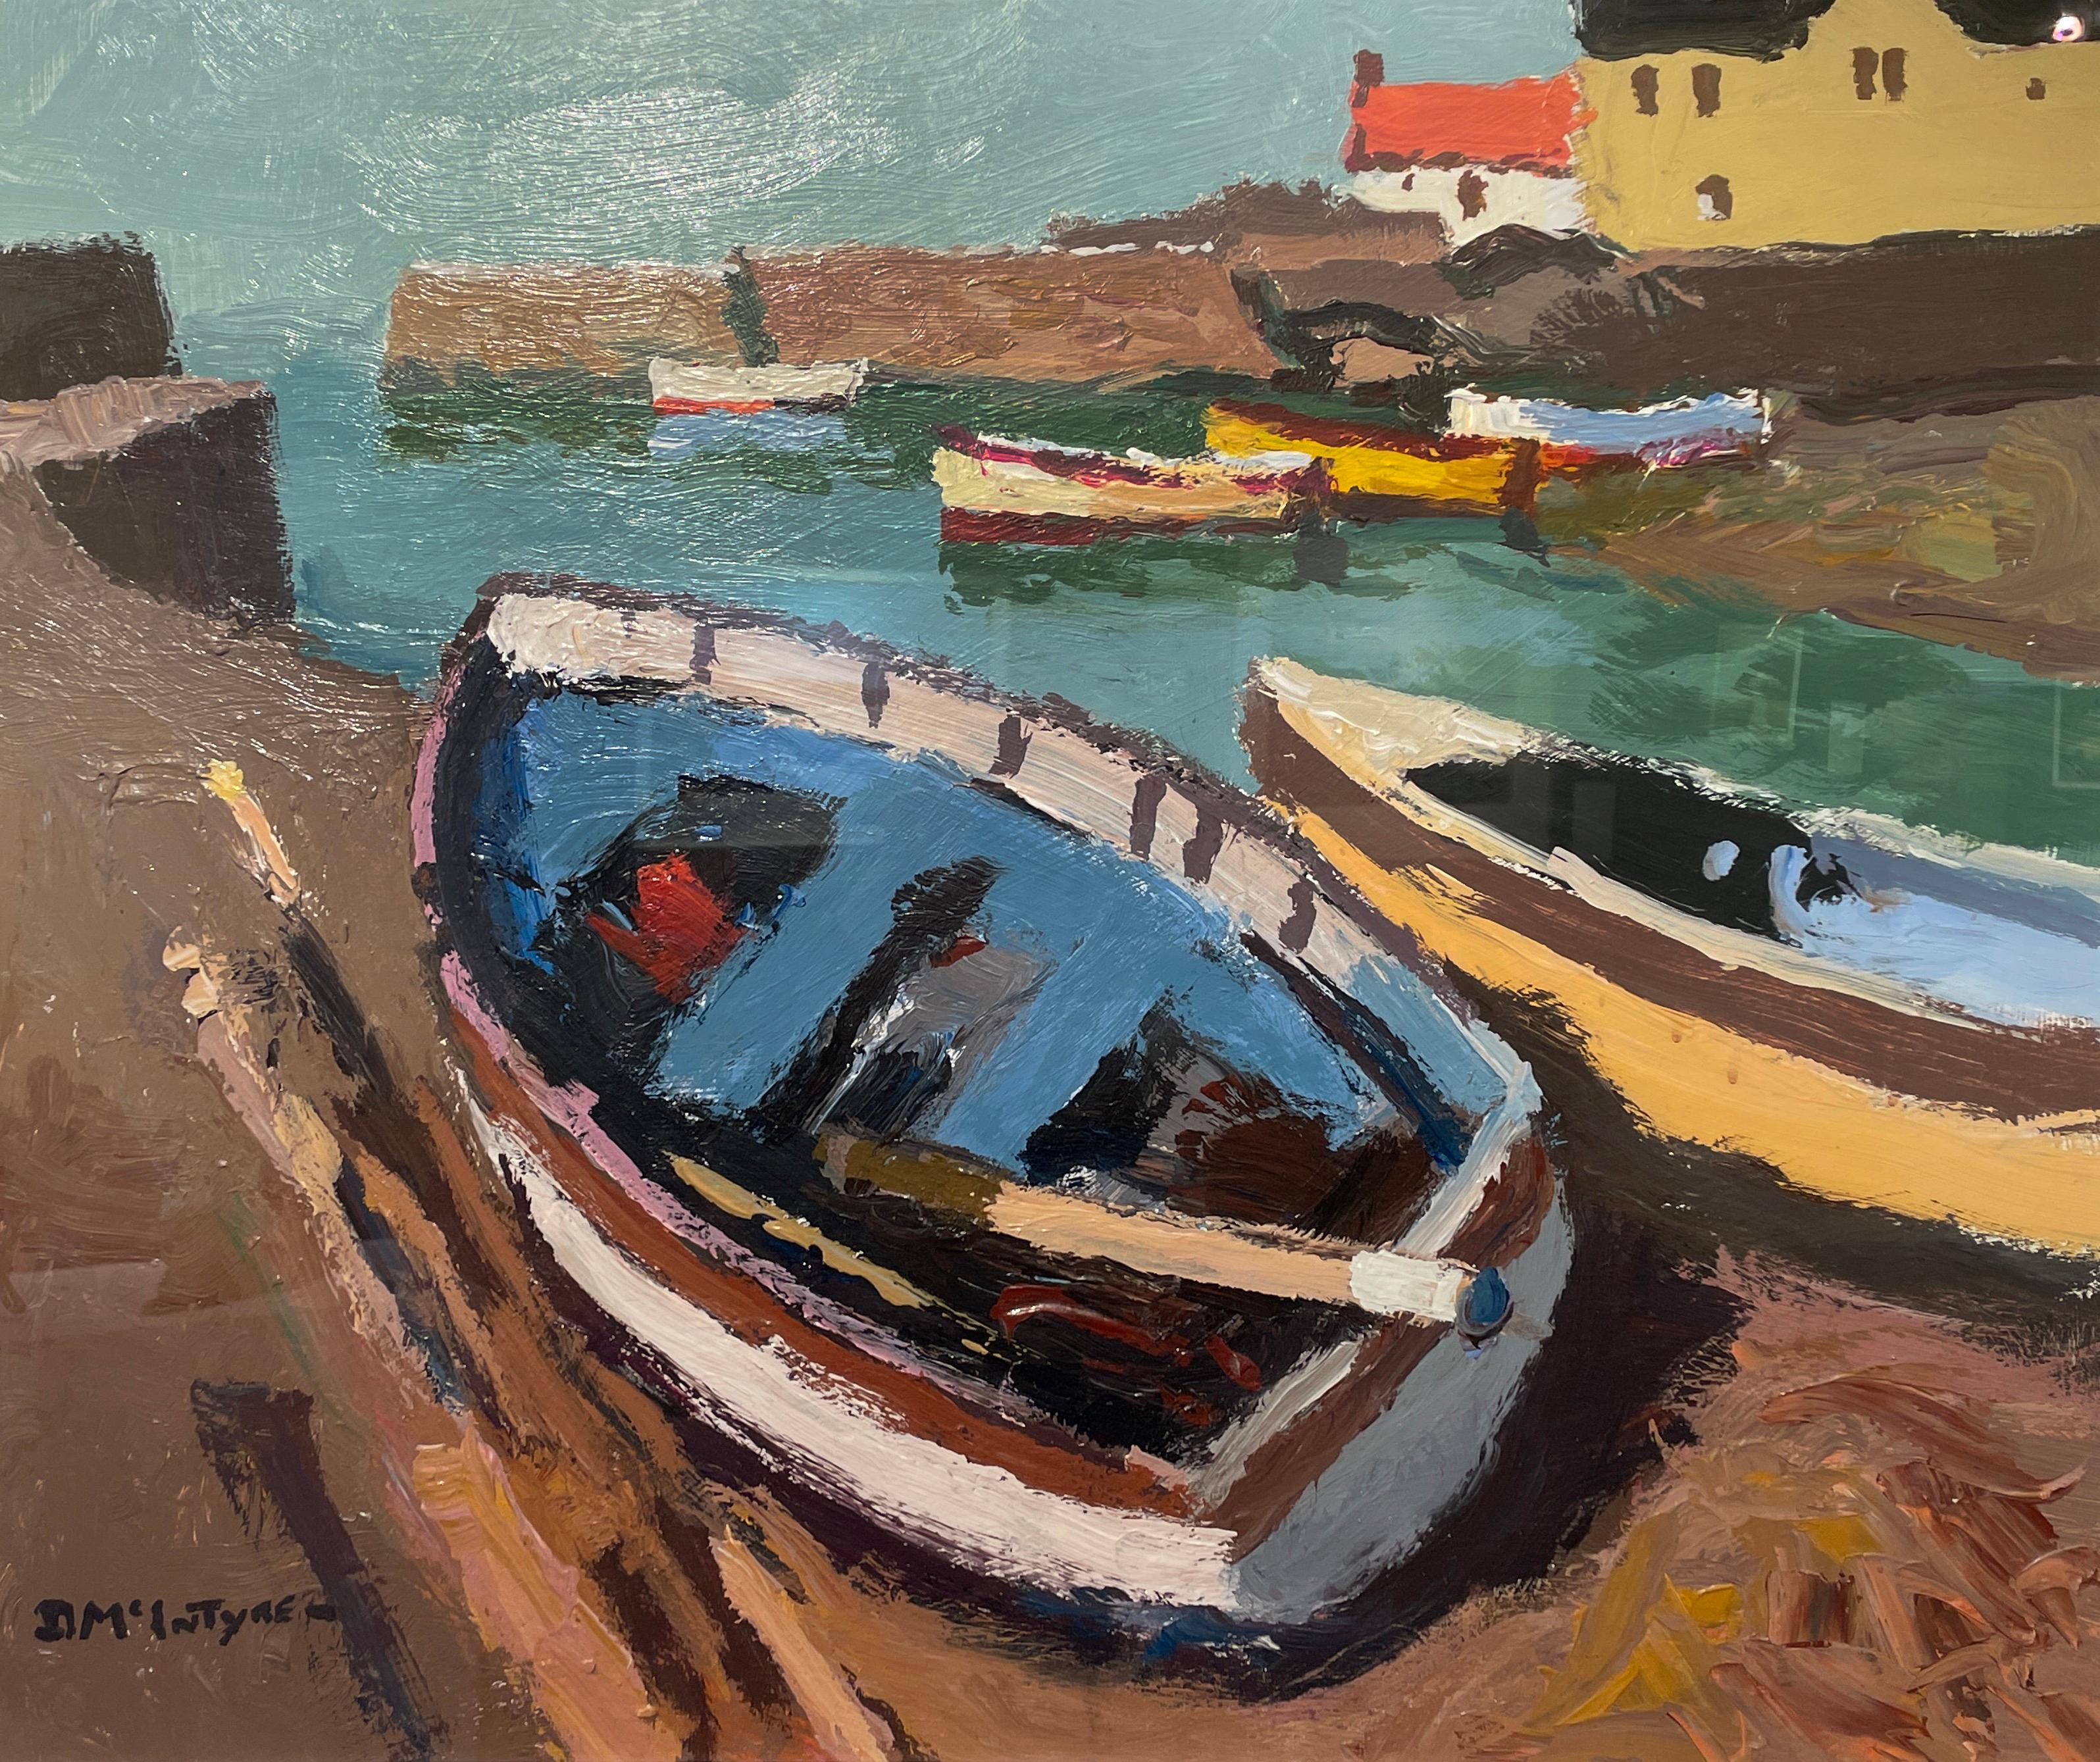 'Big Blue Boat' Colourful Welsh painting of a boat & coastline, sea, harbour - Painting by Donald McIntyre